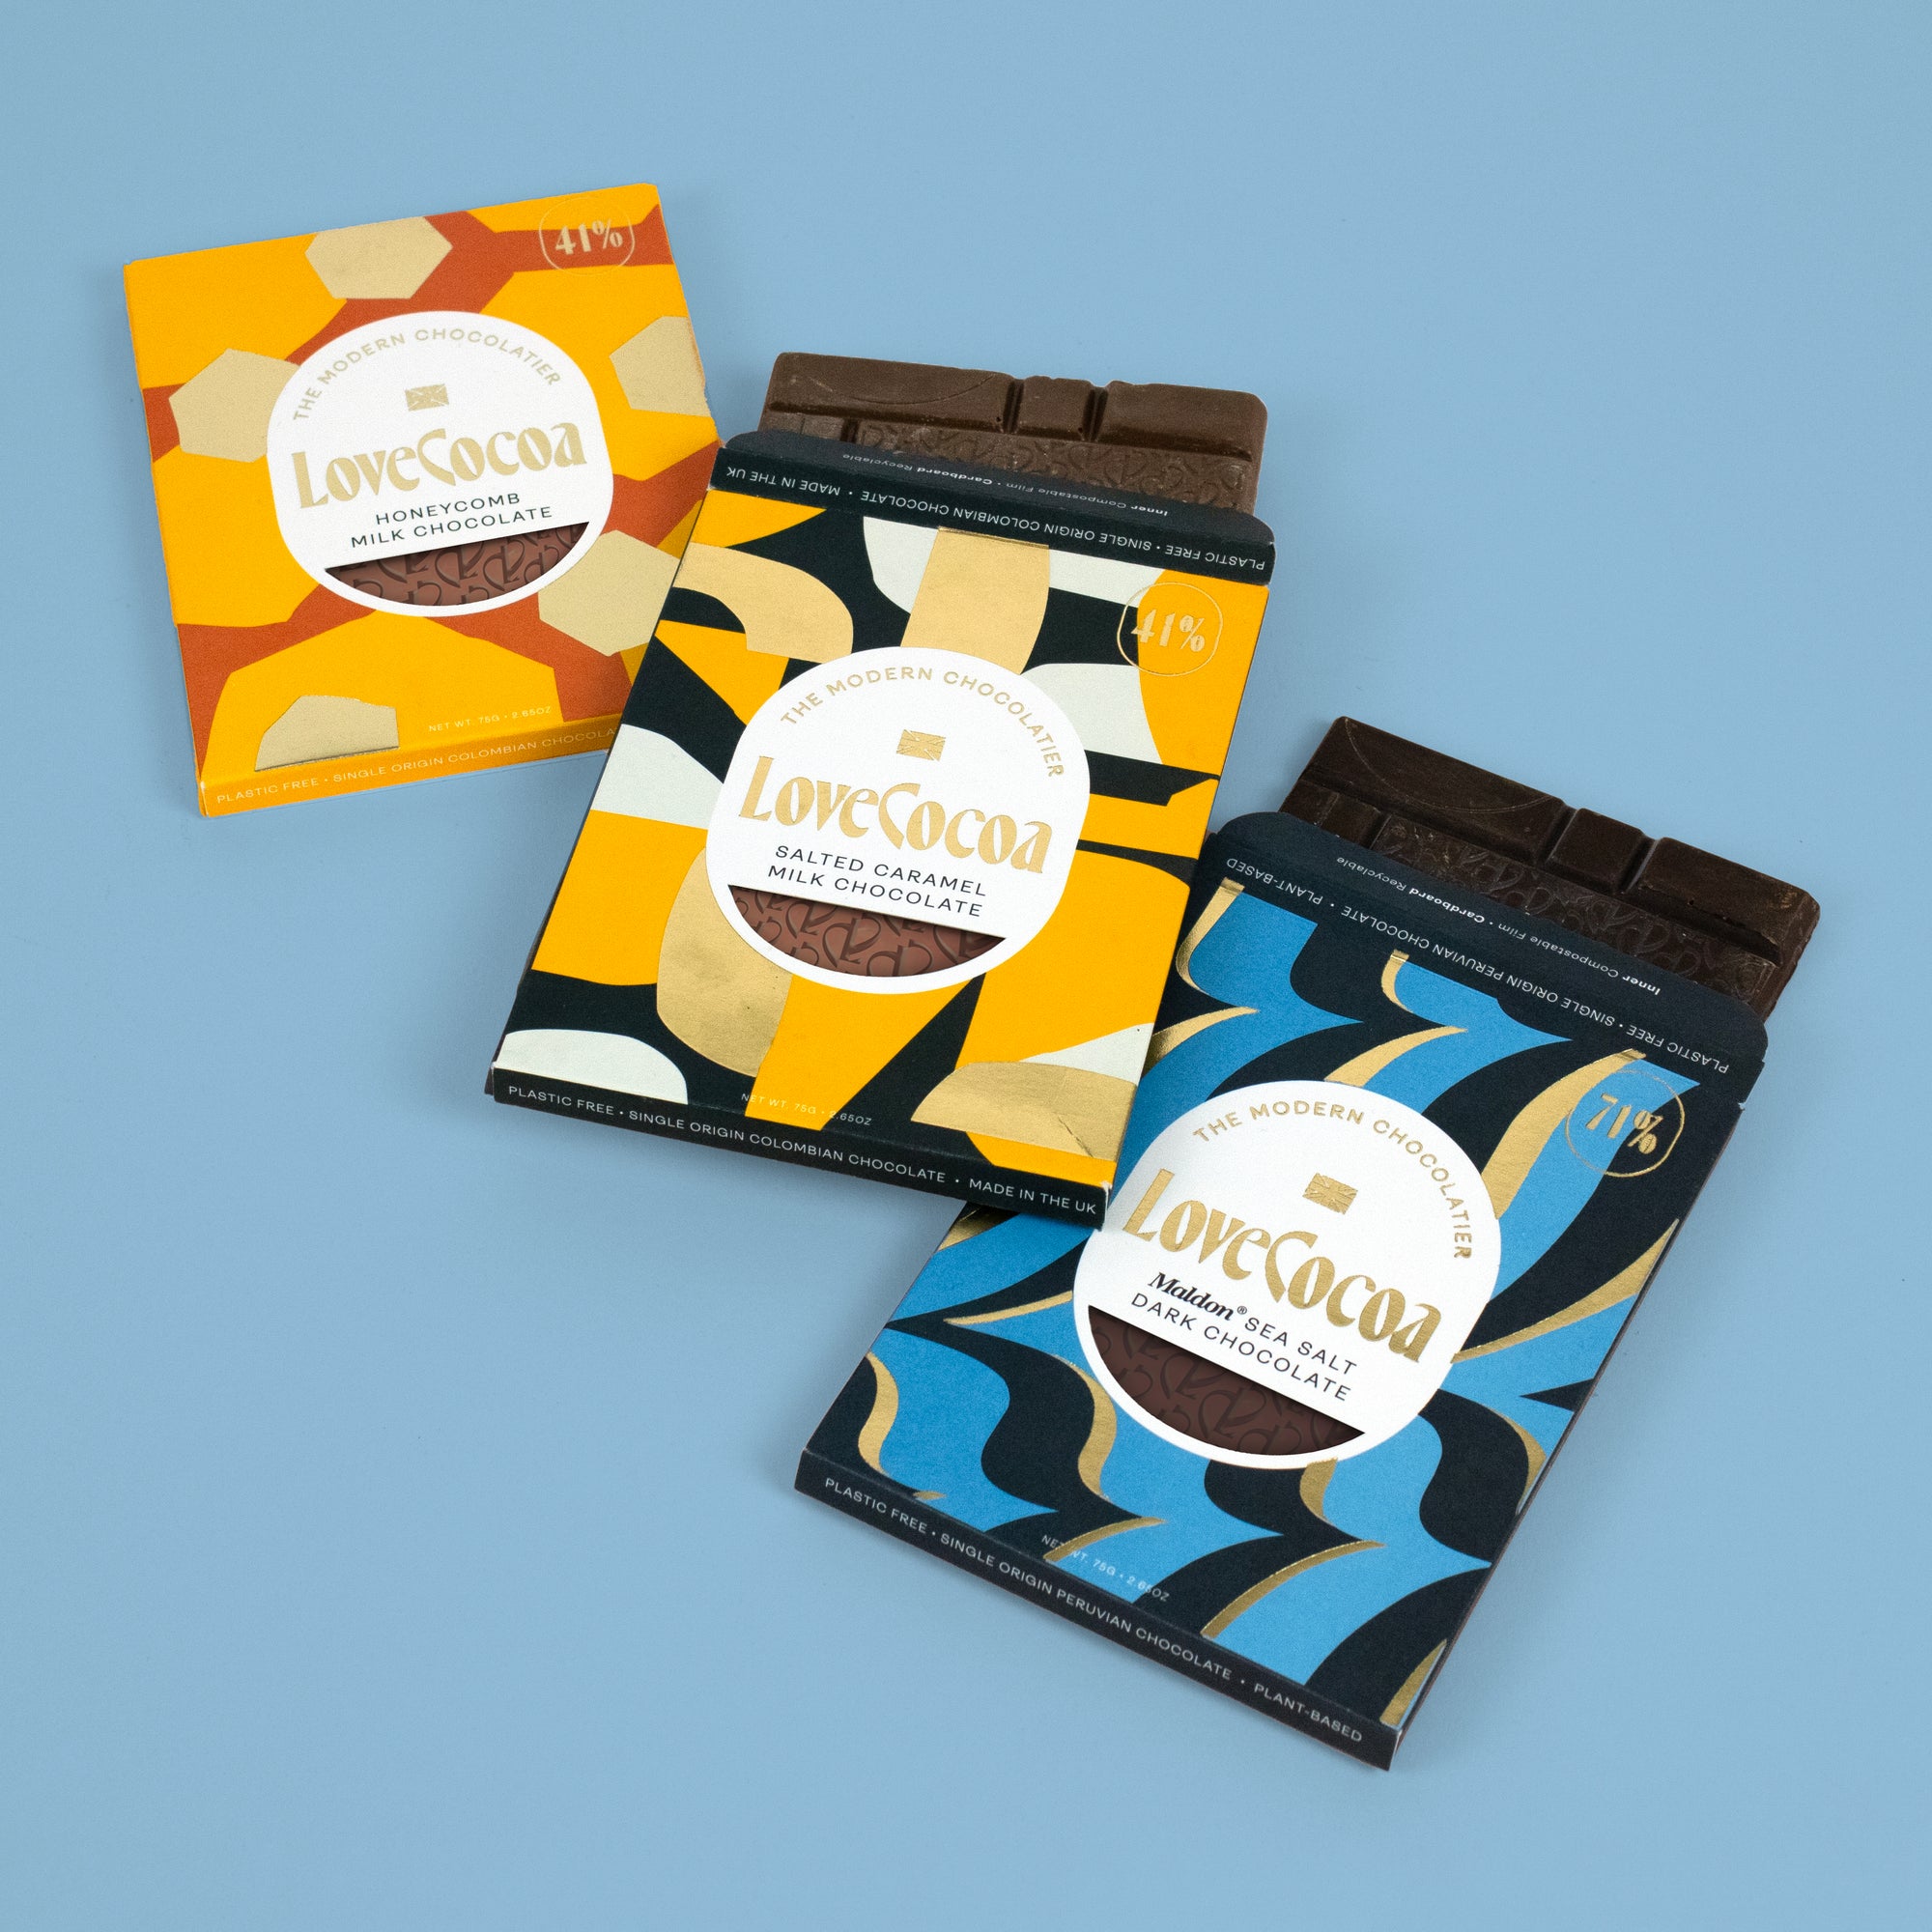 Embrace Dry January with Love Cocoa's Alcohol-Free Chocolate